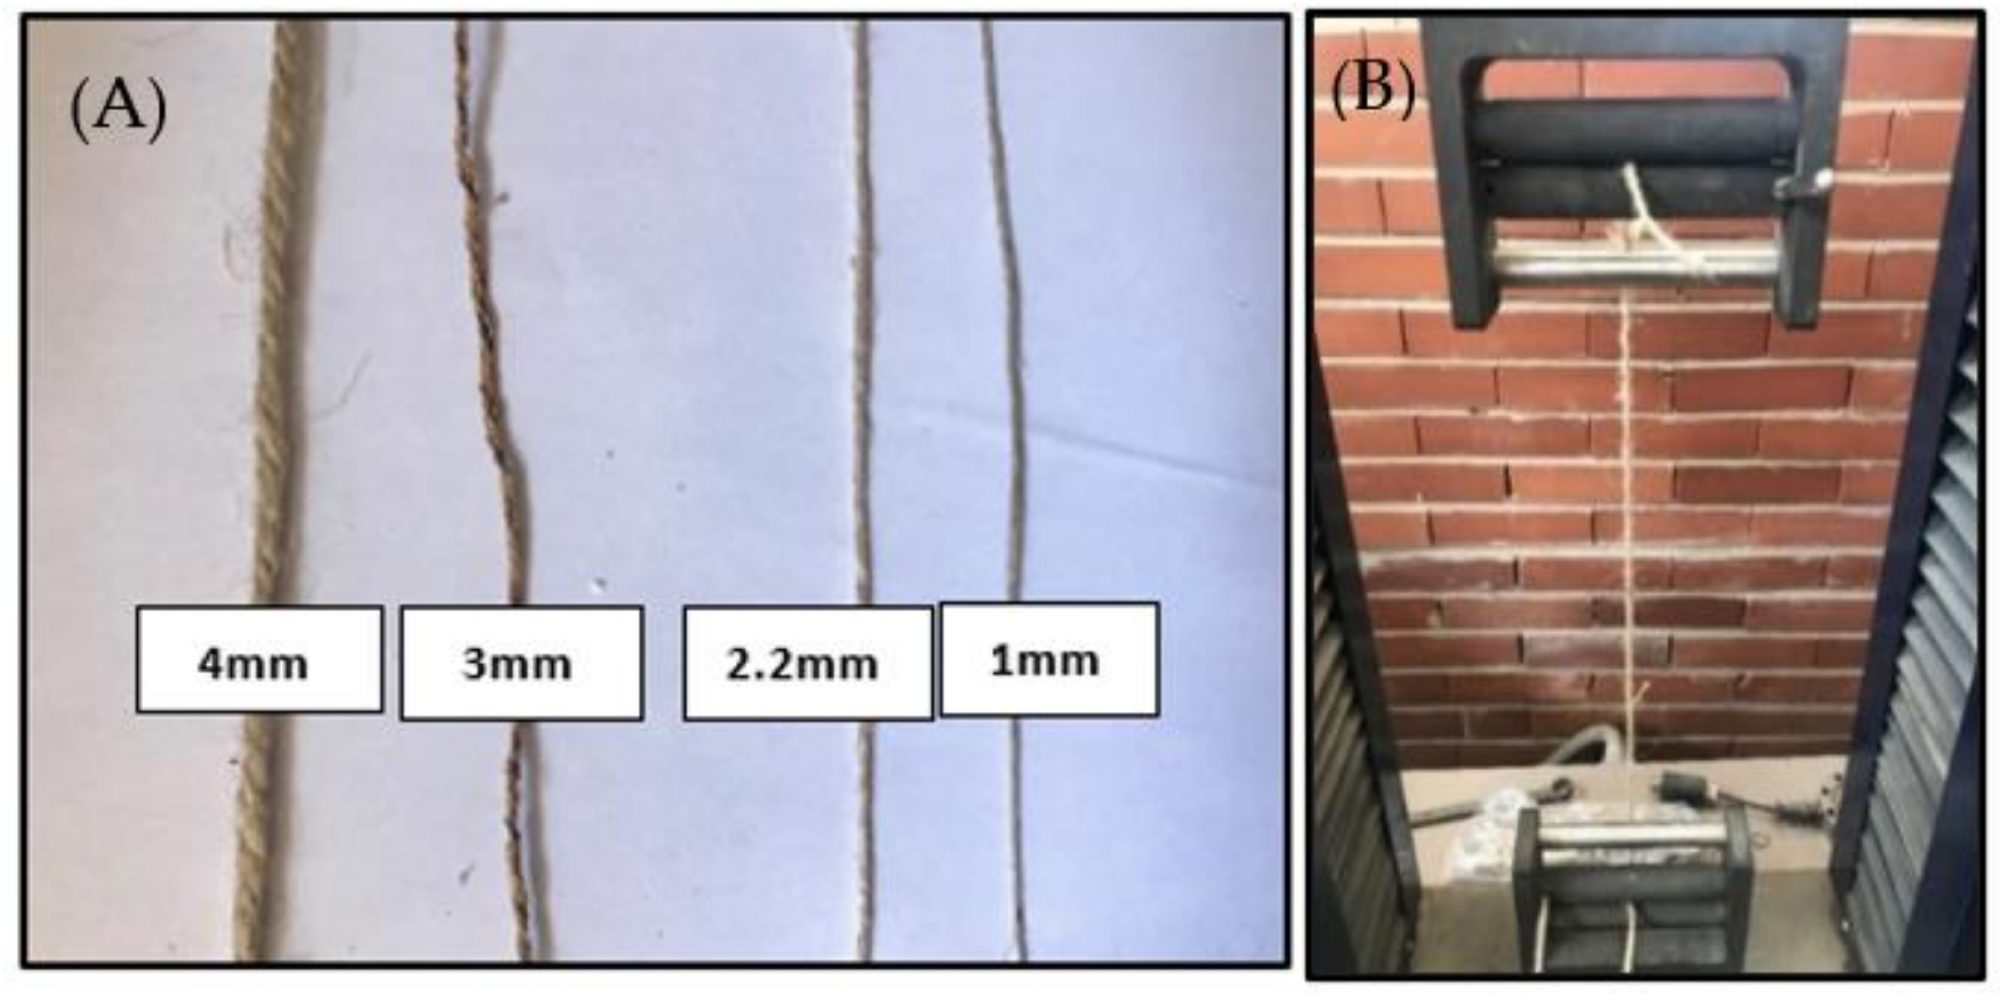 Braids of different diameter subjected to tensile test (A) and machine used for tensile tests on the hemp braids (B).